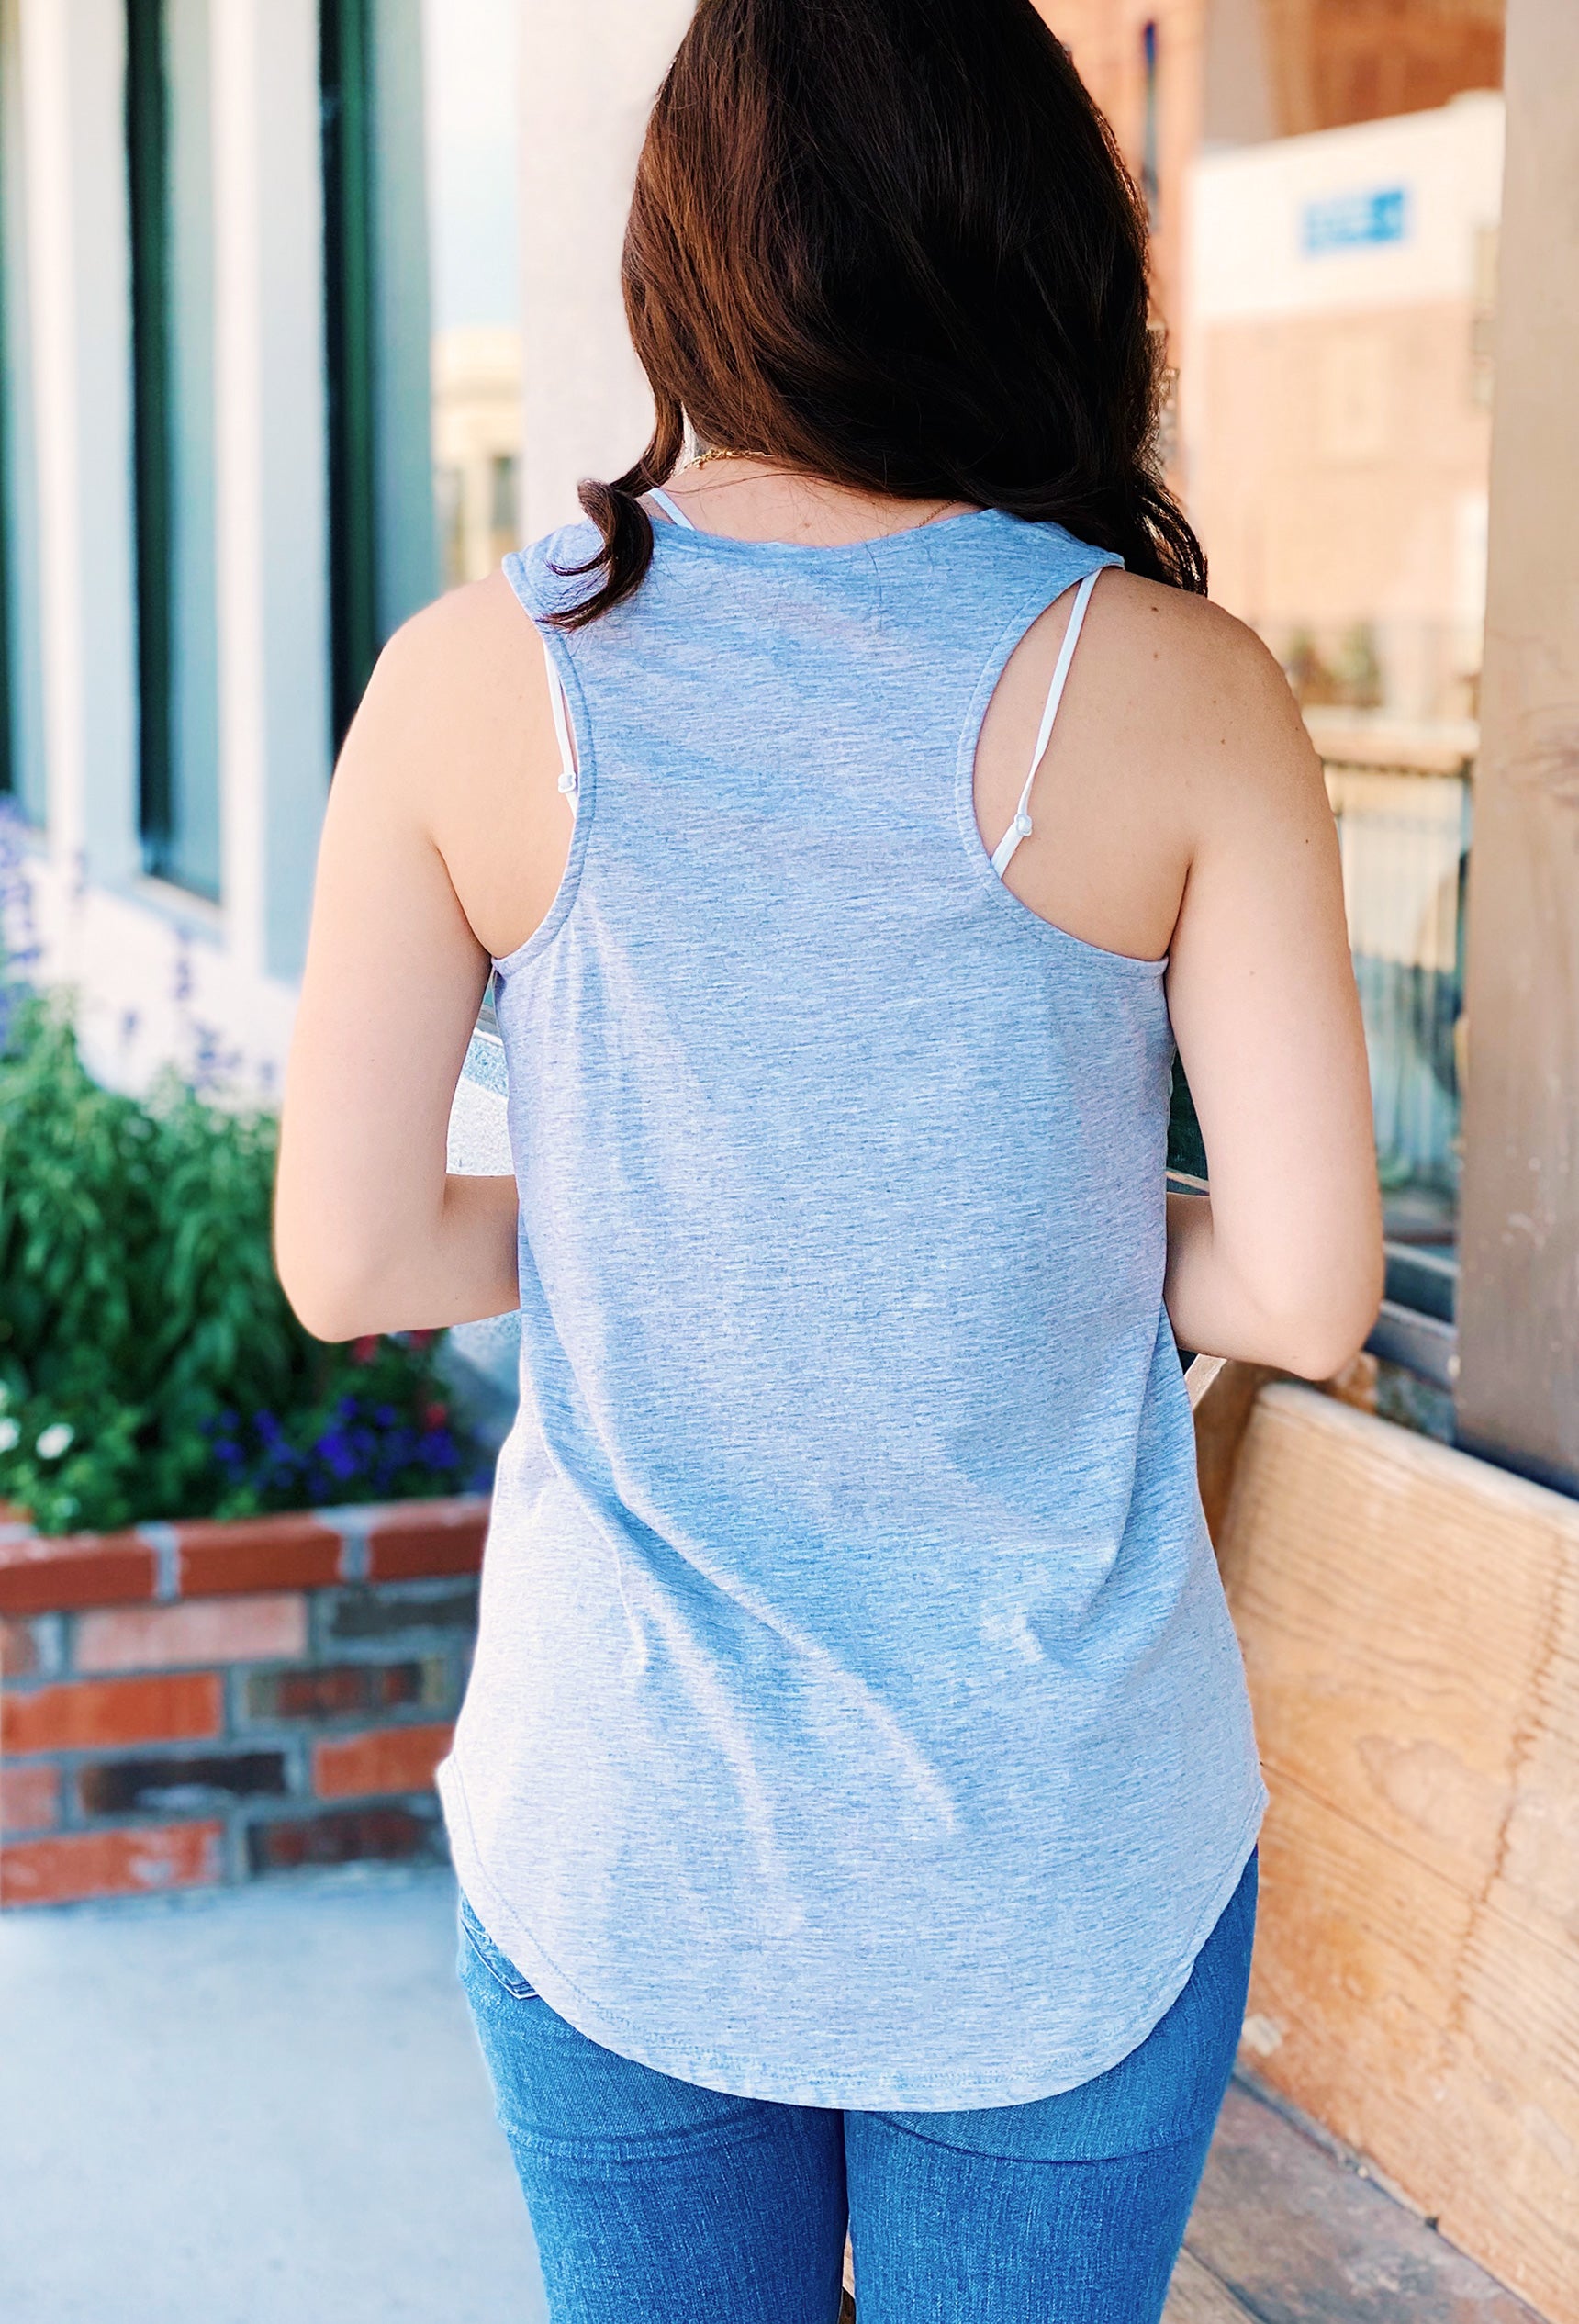 Z SUPPLY Pocket Racer Tank in Heather Gray, gray racer back tank top with a pocket